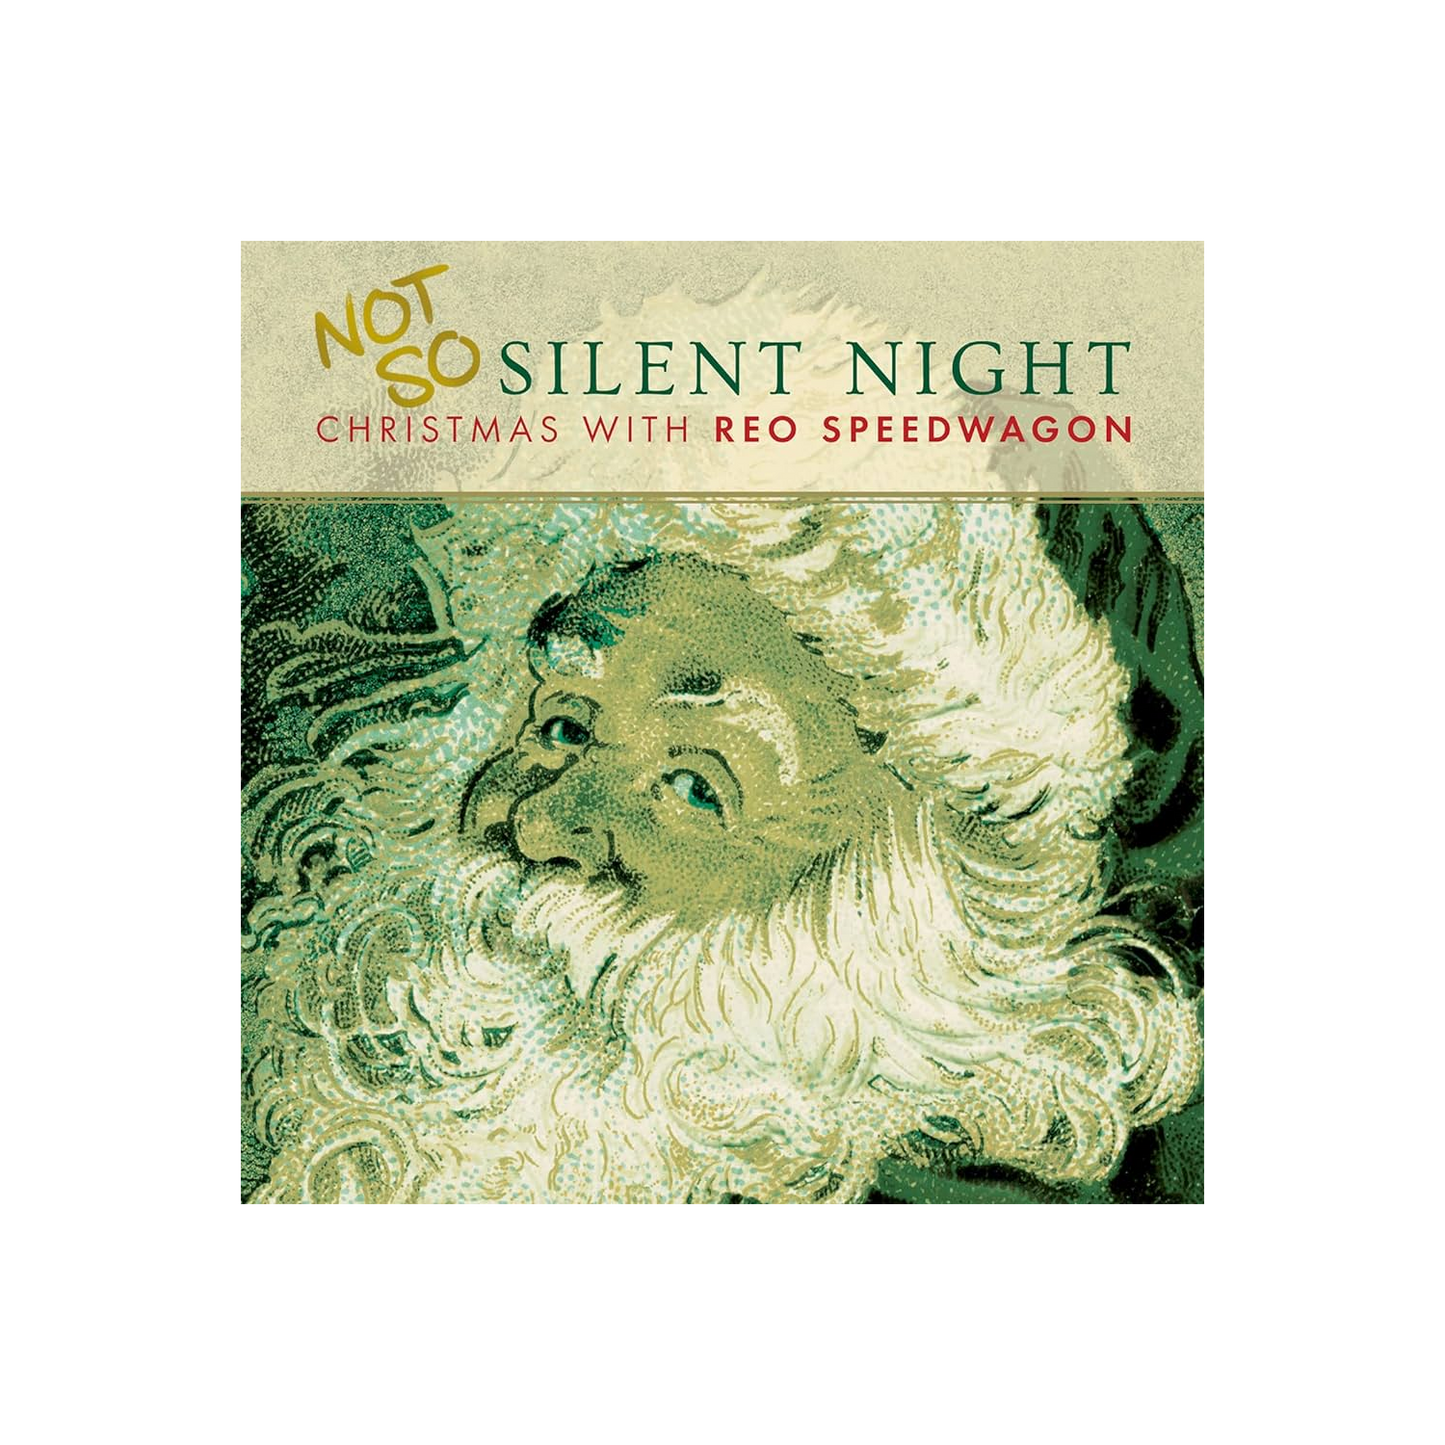 Christmas with REO Speedwagon "Not So Silent Night" CD